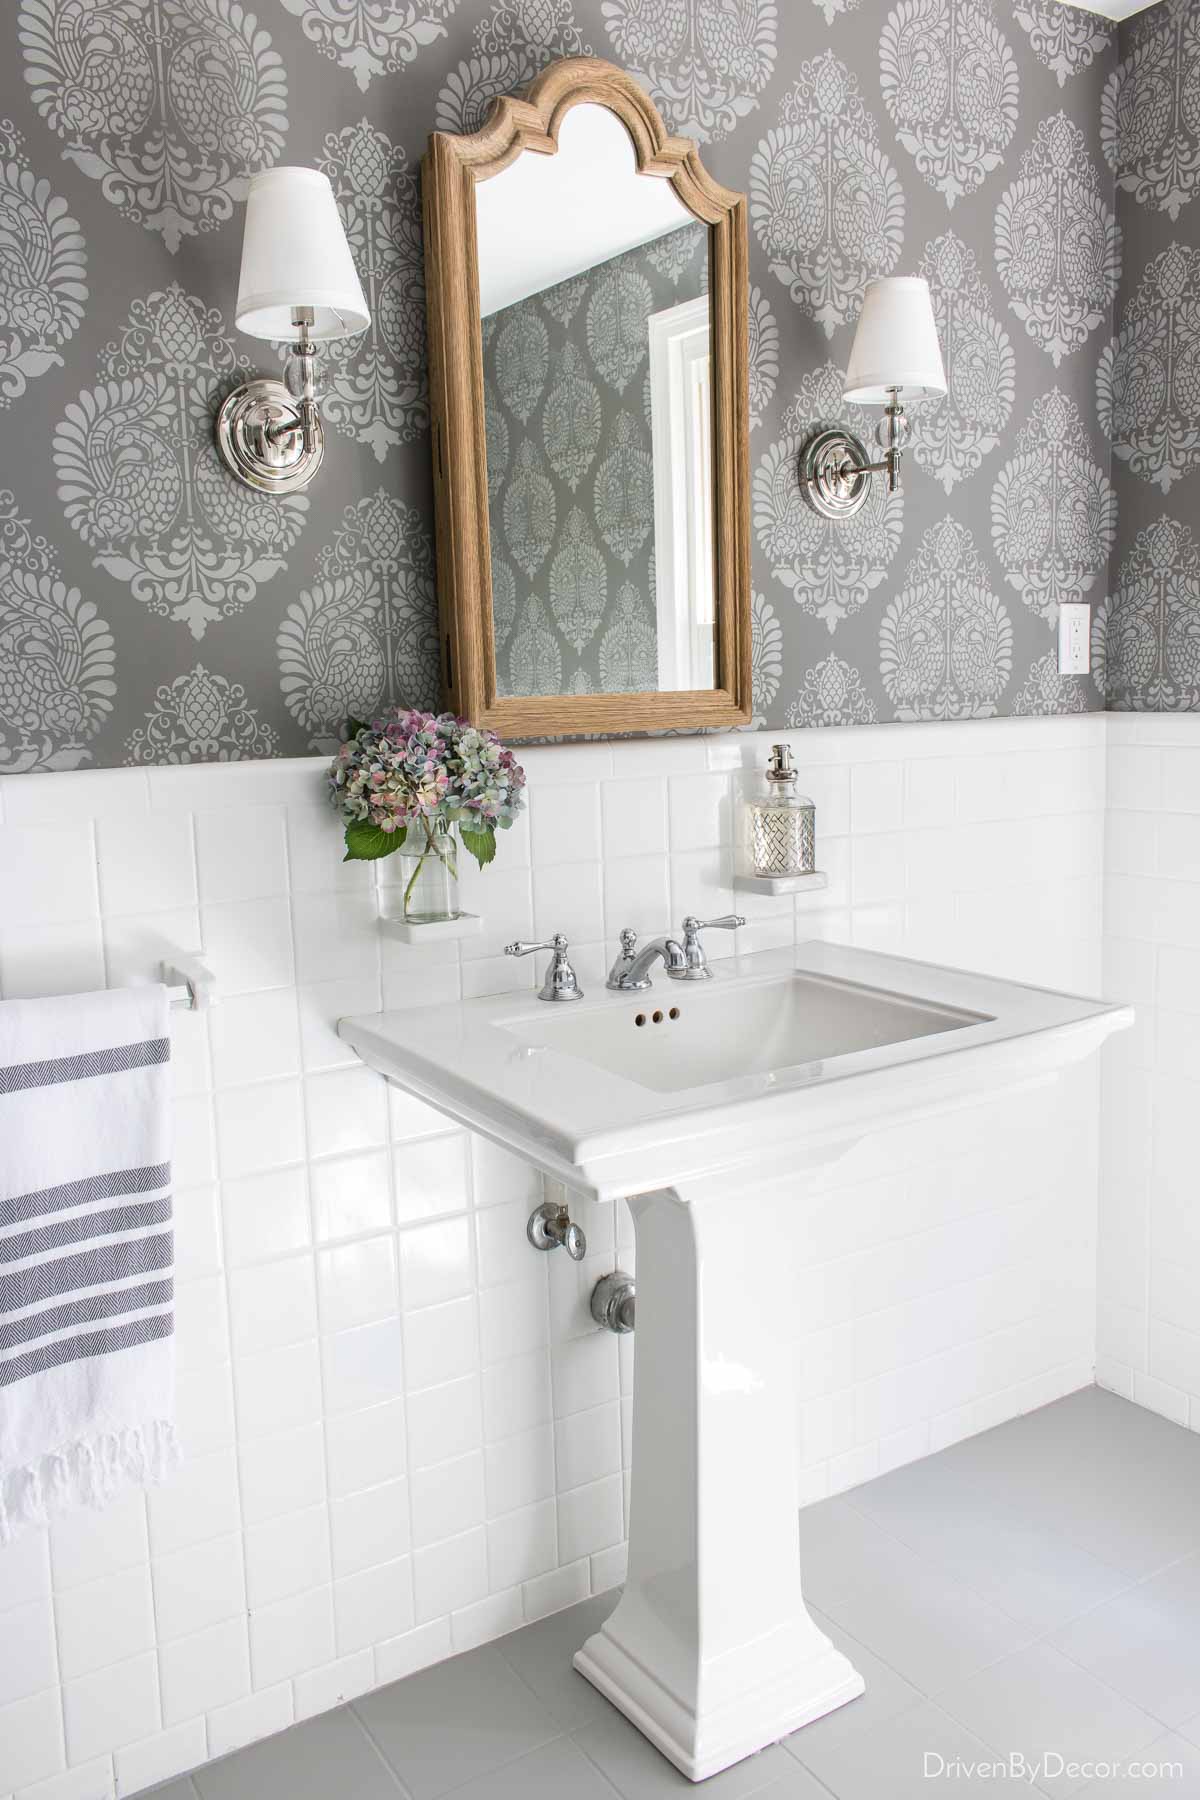 The mirror over the sink is actually a recessed medicine cabinet - perfect for extra bathroom storage!